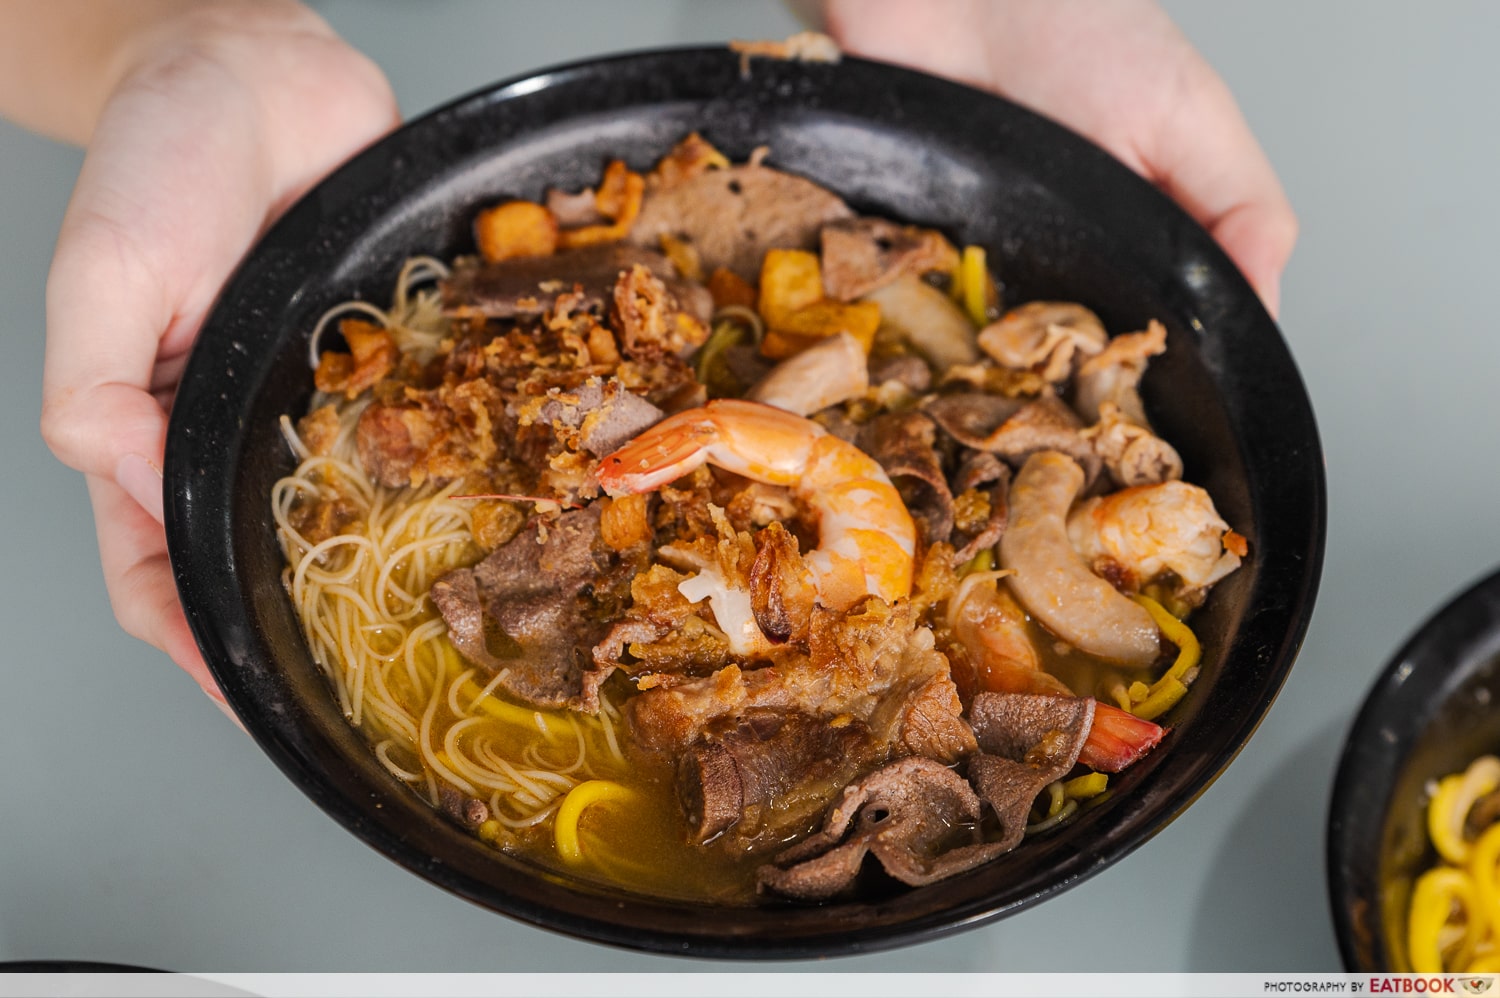 Amoy_Street_Boon_Kee_Prawn_Noodle_everything